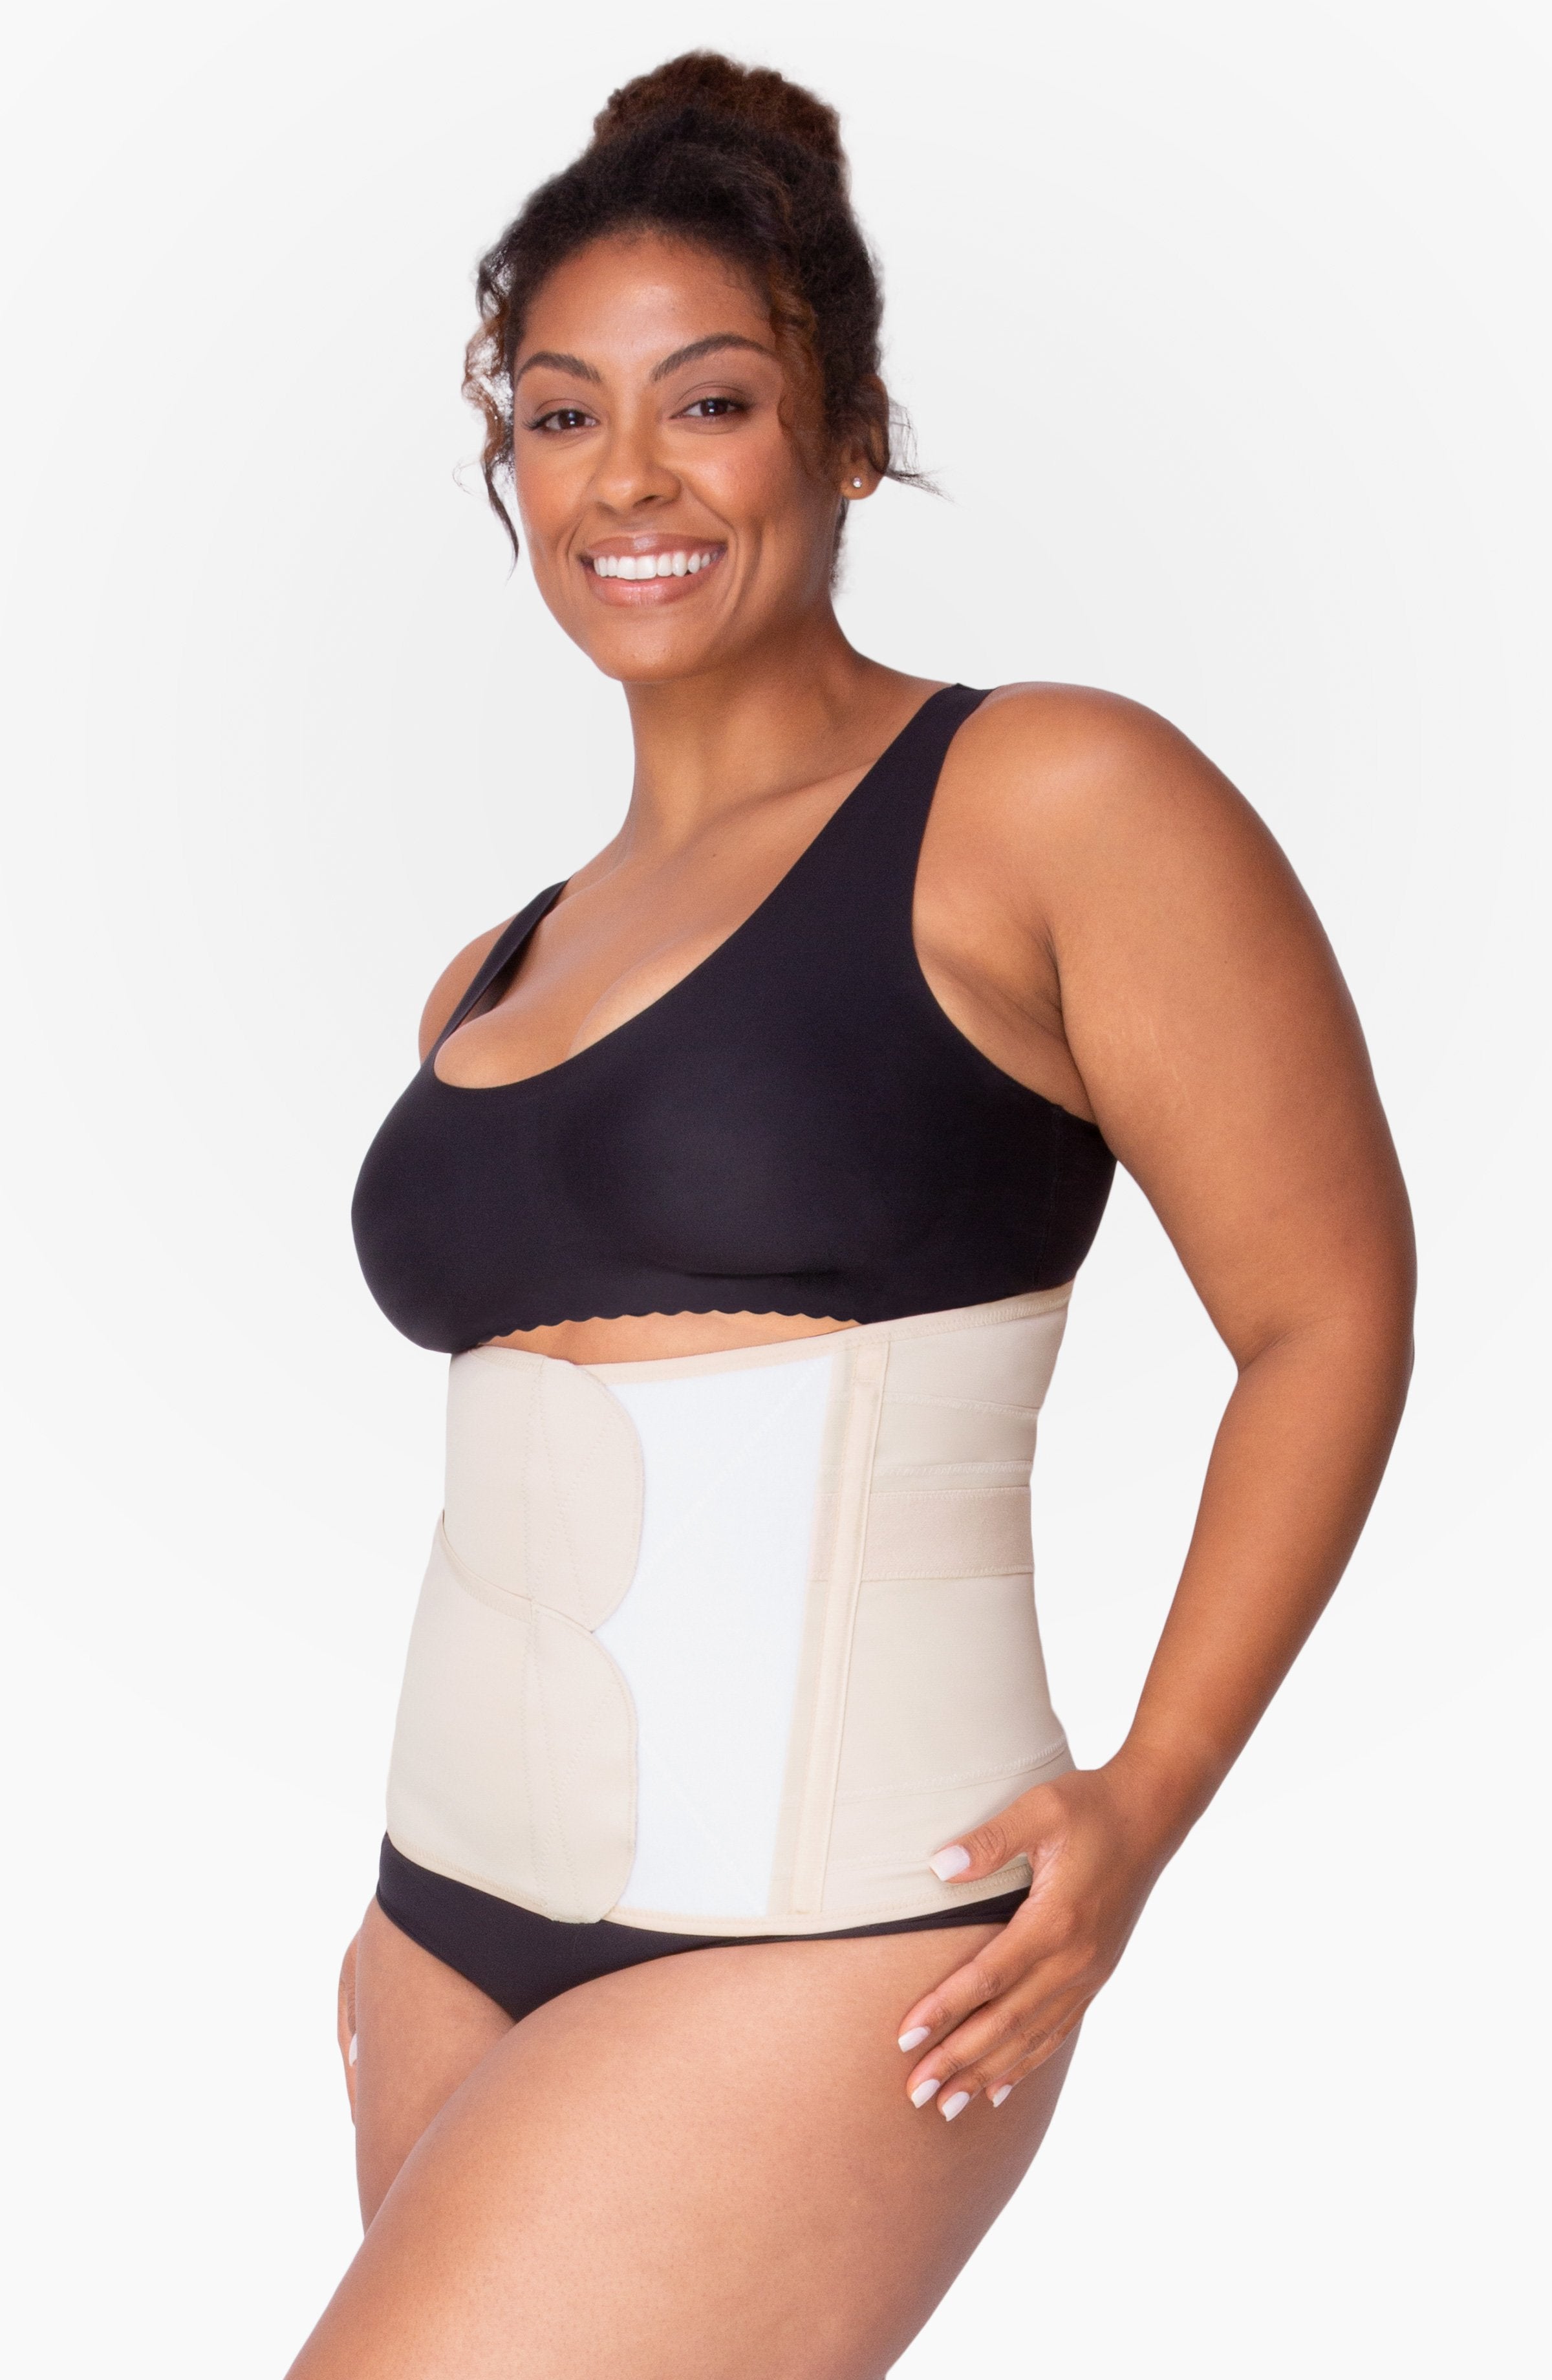 Belly Bandit - Postpartum Sculpting Girdle - X-Small, Nude 